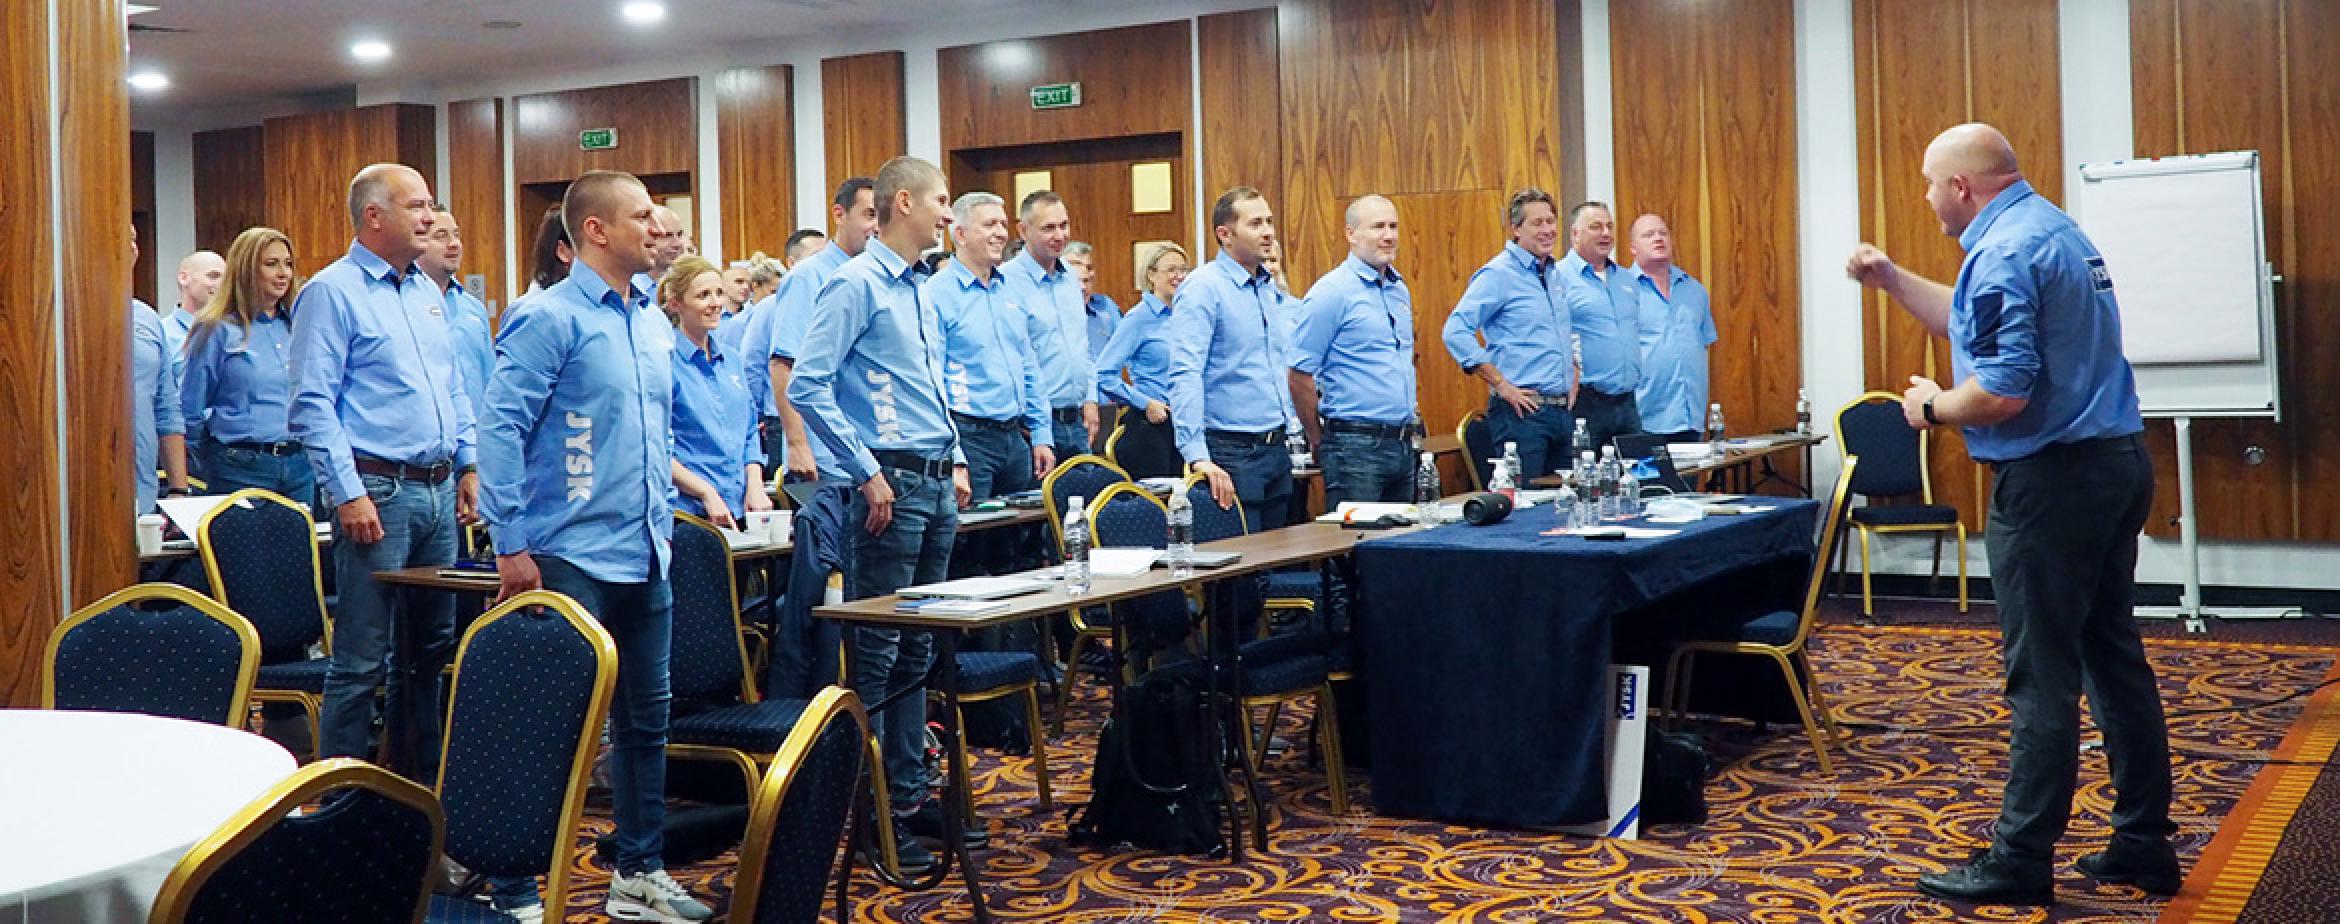 Retail Managers Meeting: two days of best practice sharing in Sofia